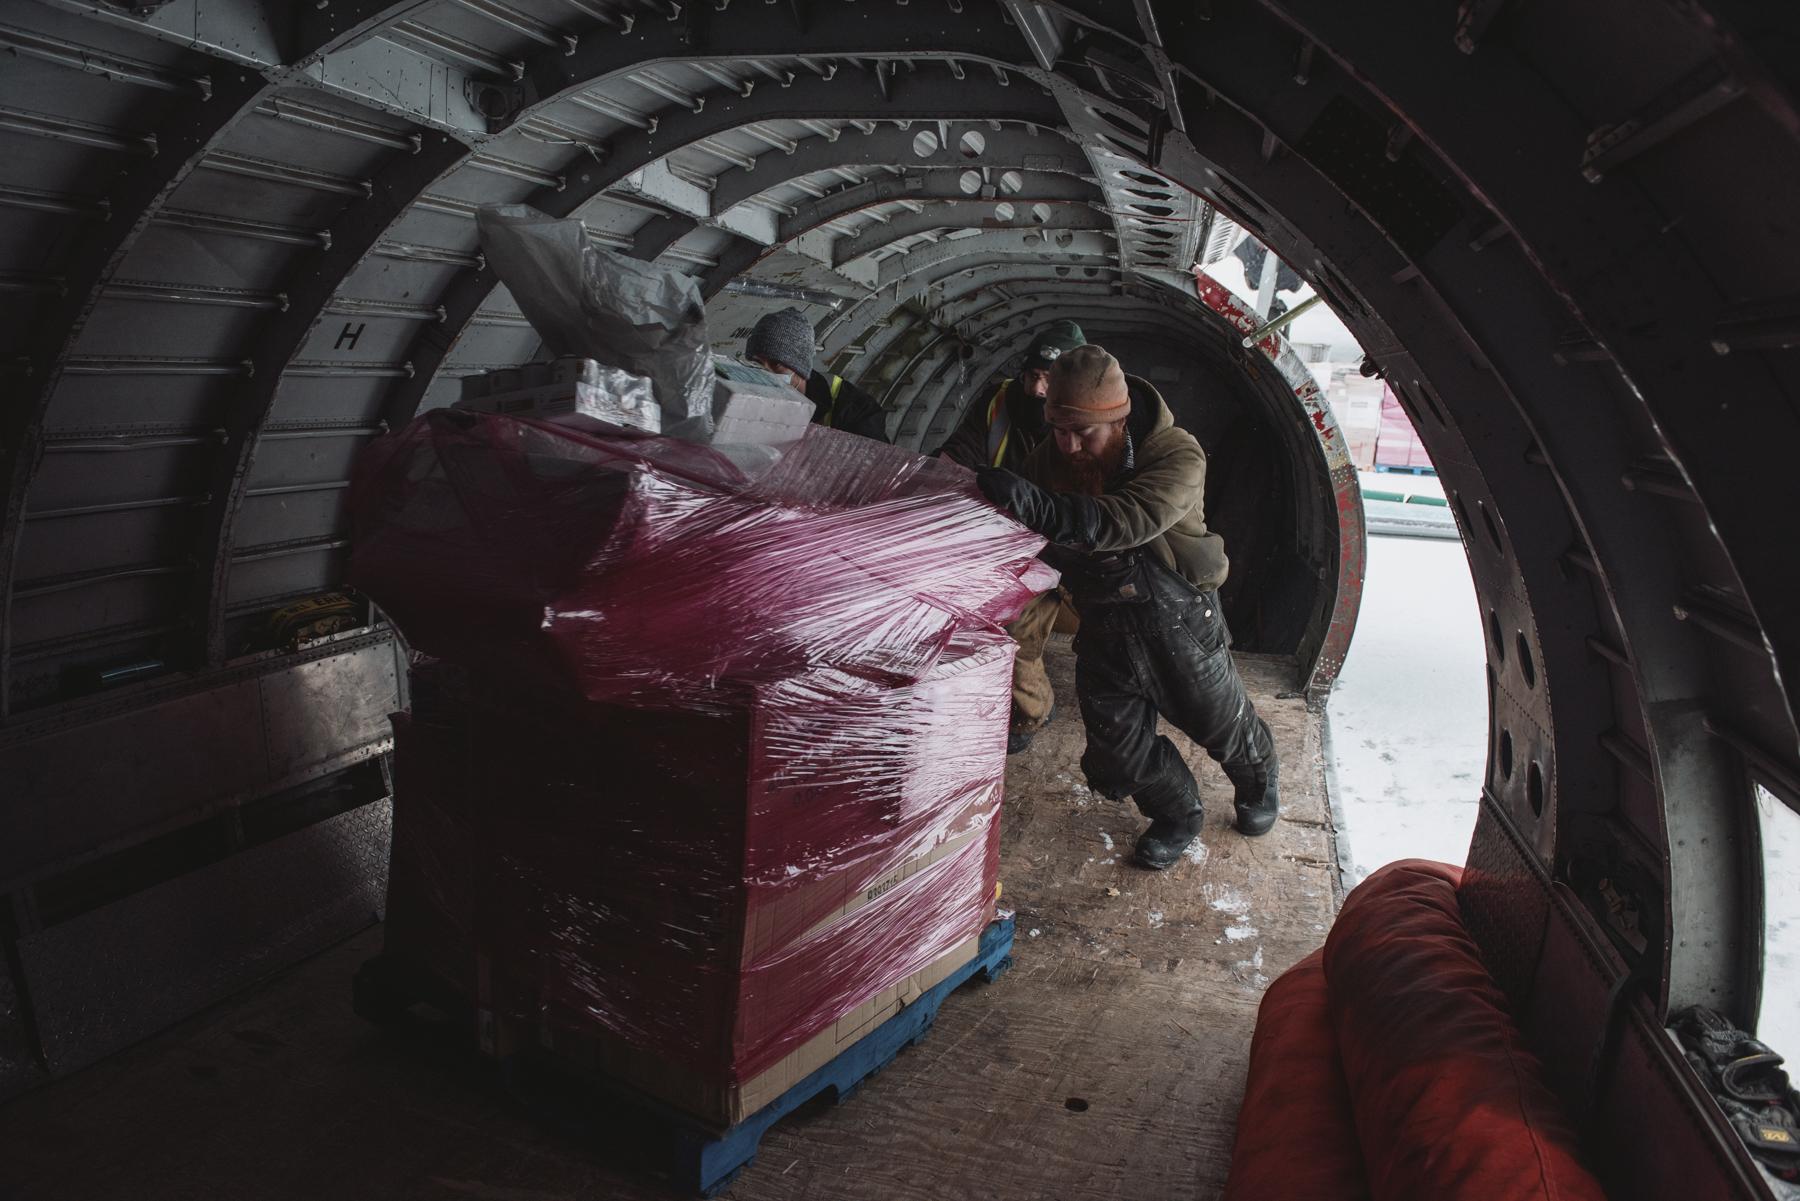 The Hunt for Healthy Food - Workers load food into the fuselage of a Buffalo Airways...